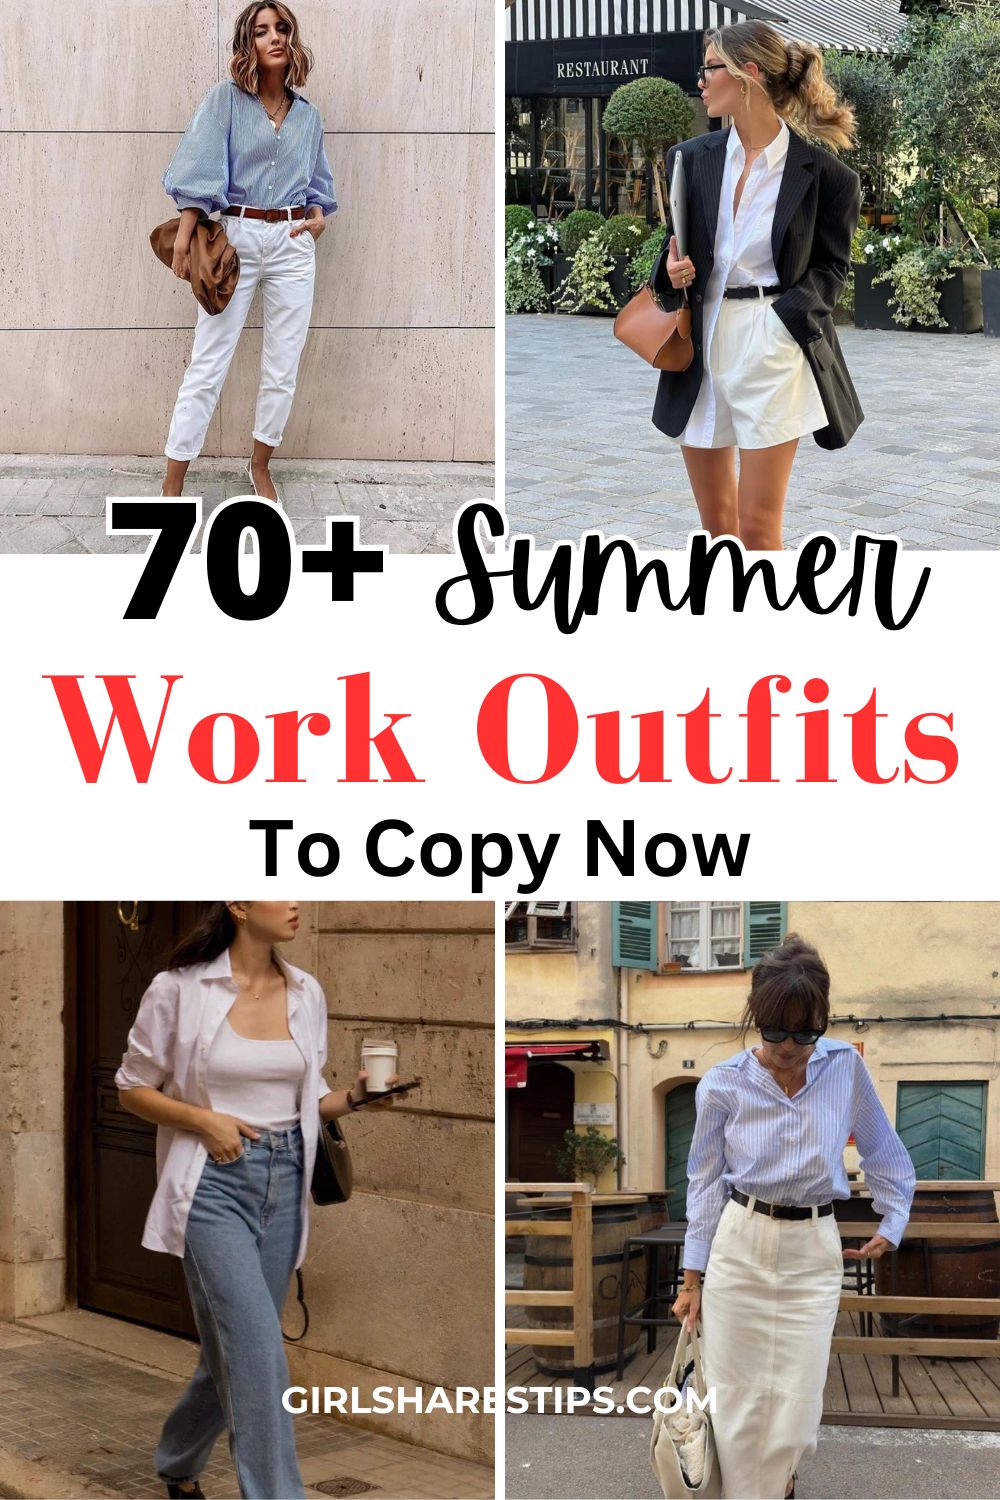 summer work outfits for women collage